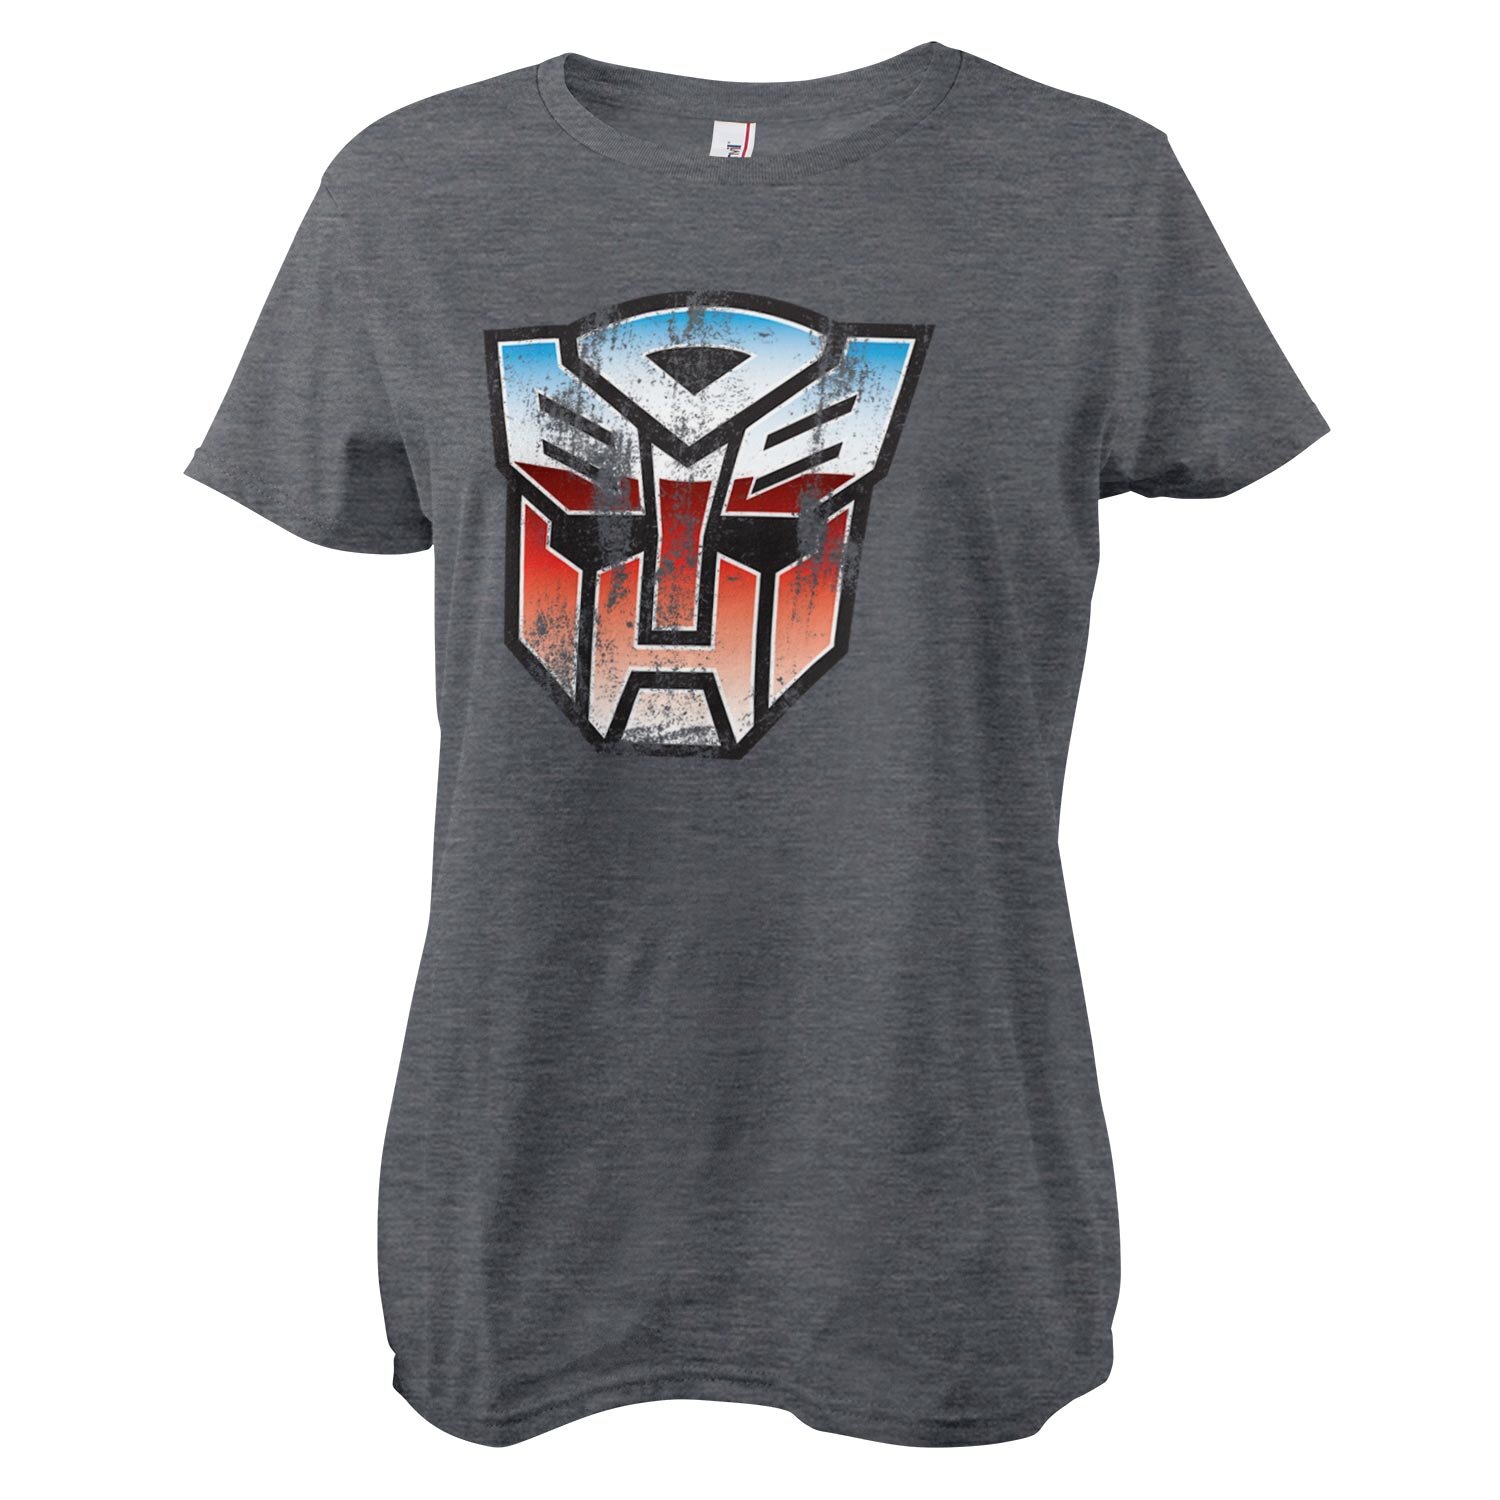 Distressed Autobot Shield Girly Tee